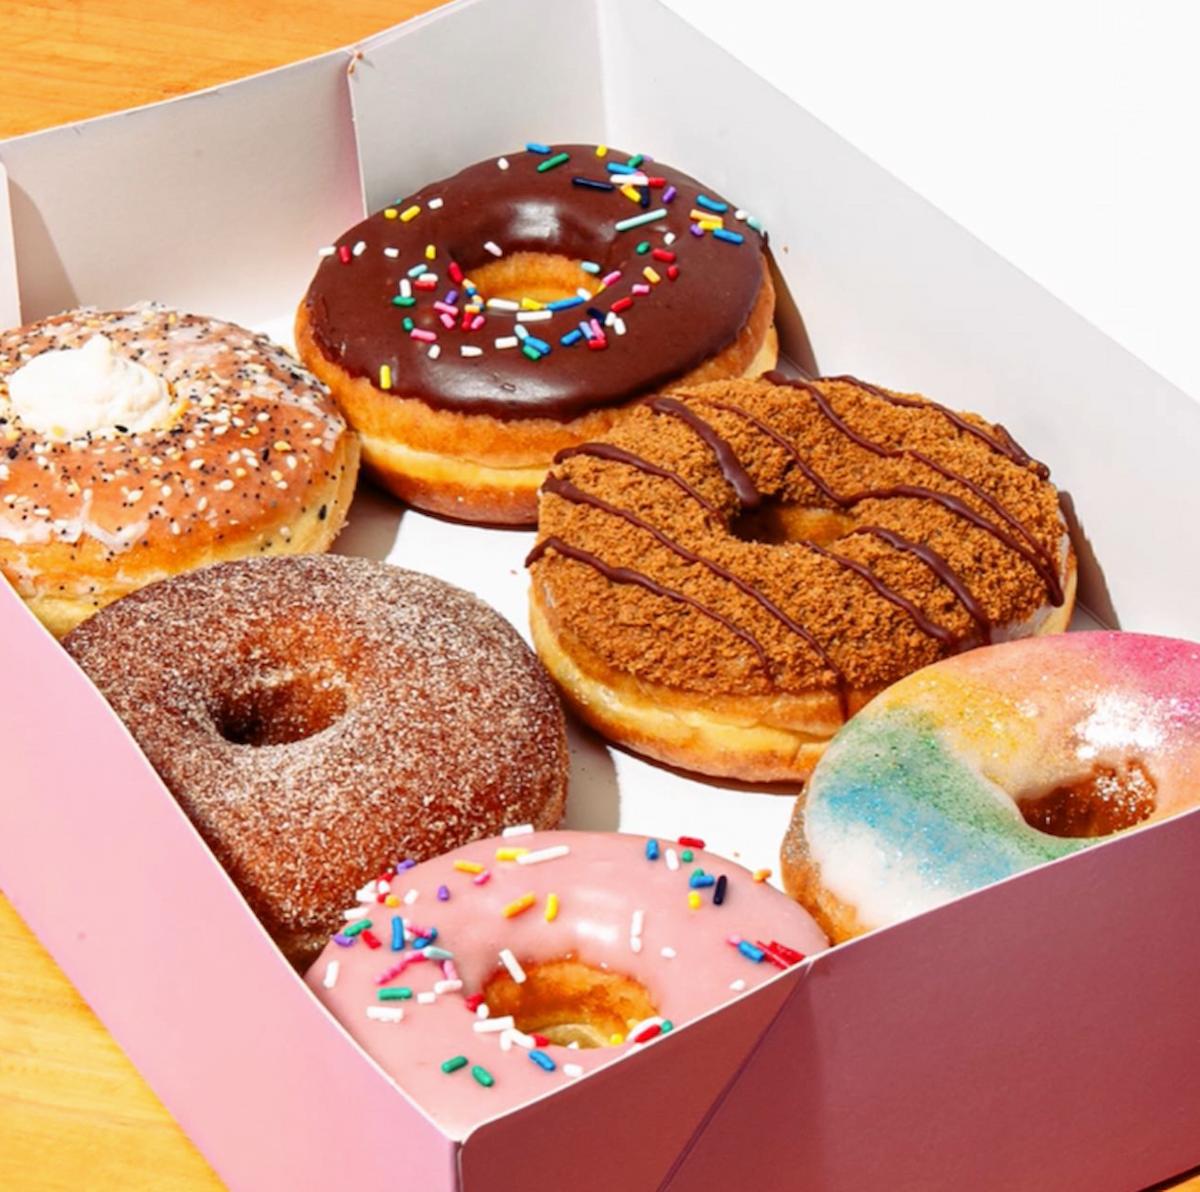 An assortment of vegan donuts in a box from Dough Joy.